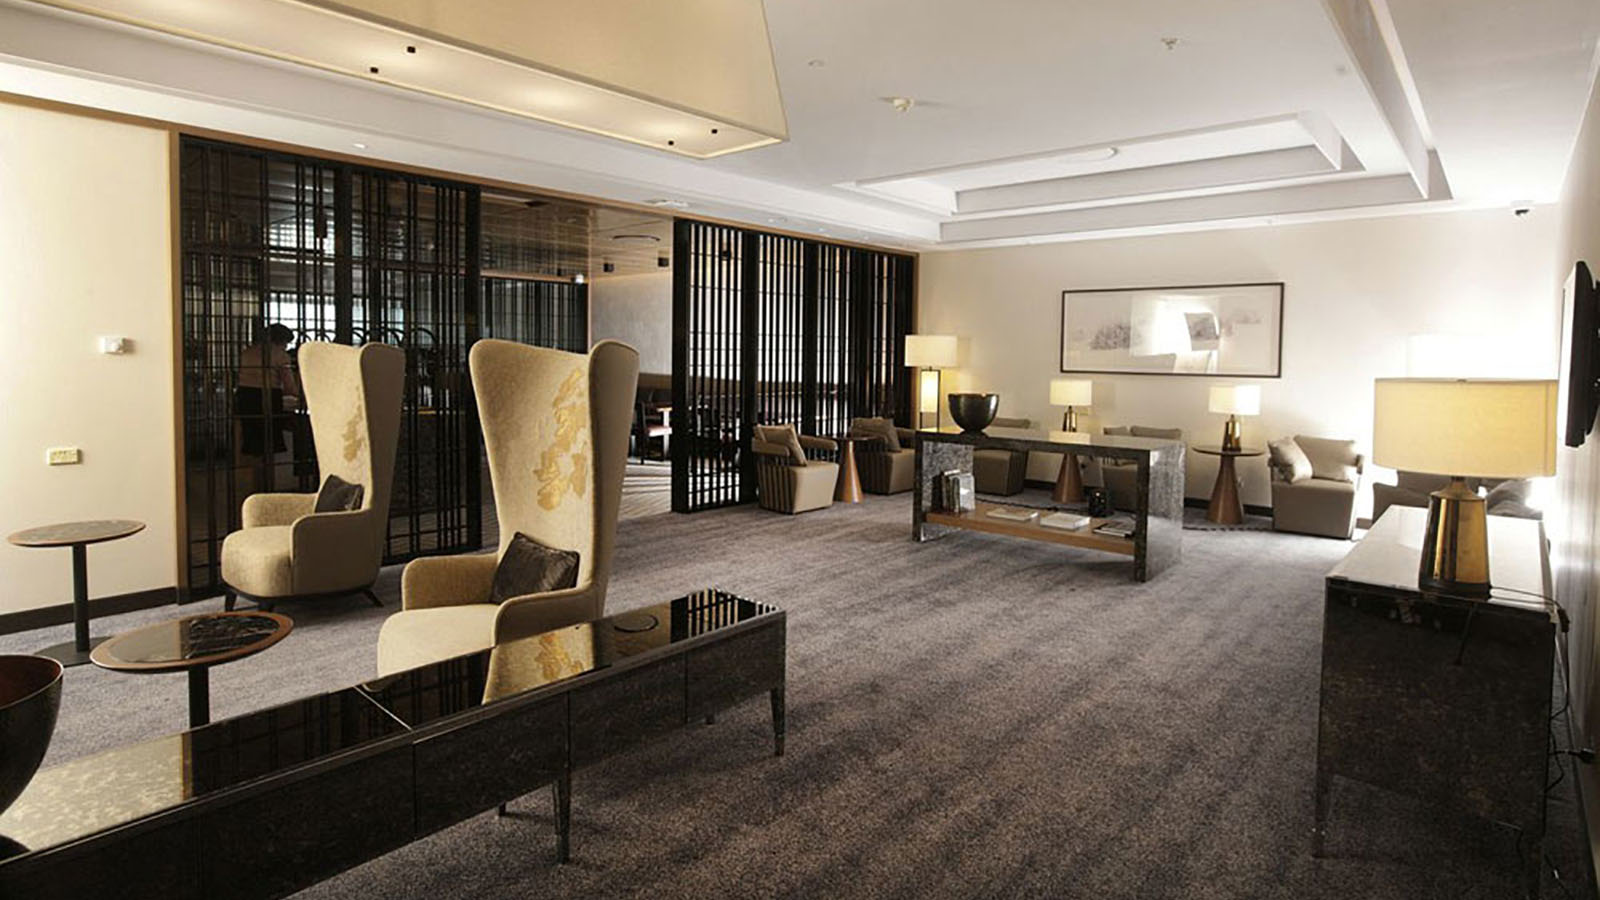 Singapore Airlines' First Class Lounge in Sydney